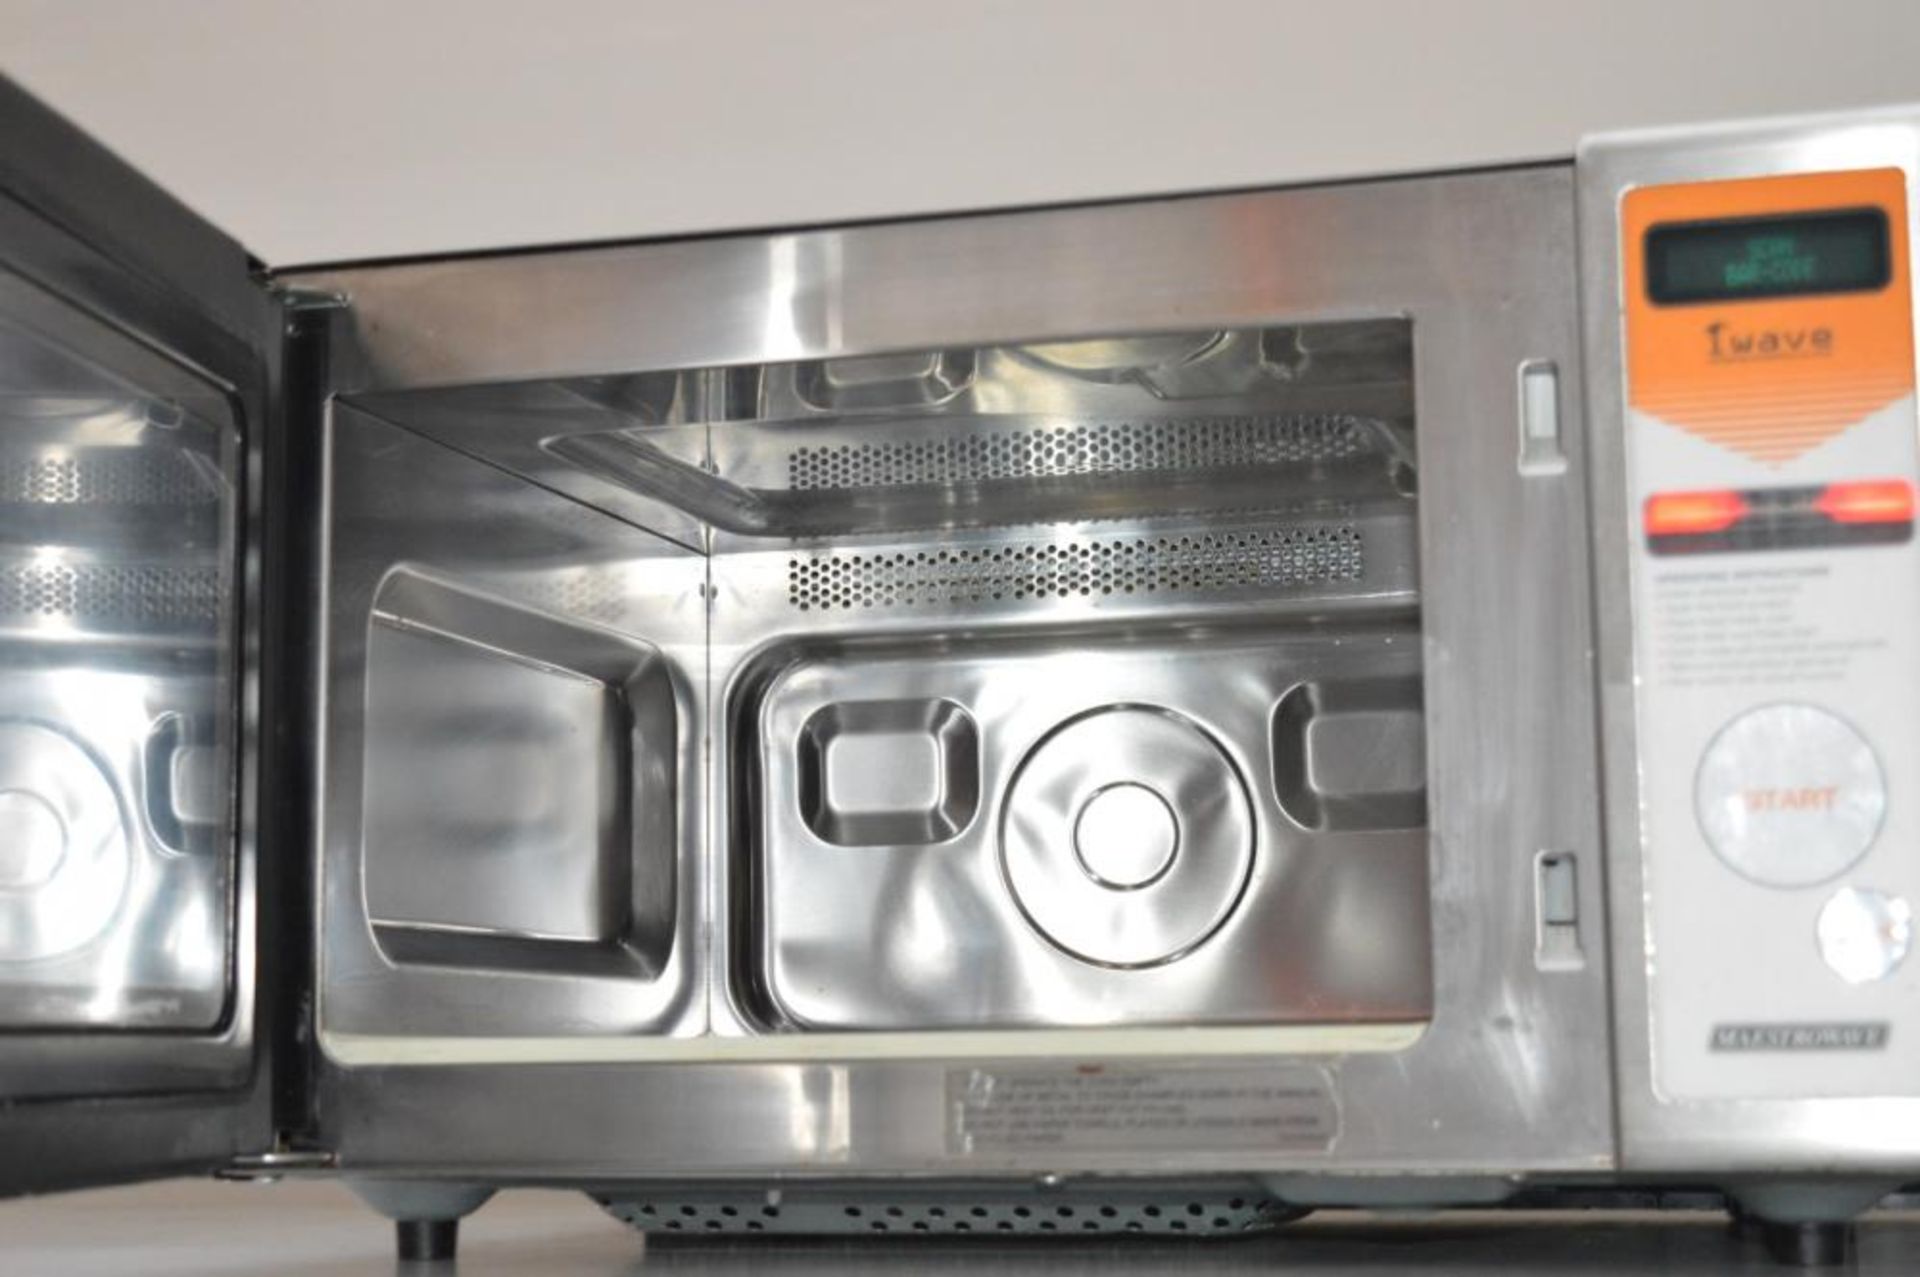 1 x iWave MiWAVE1000 Automated Foodservice Solution - Stainless Steel 1000w Catering Microwave - Image 5 of 14